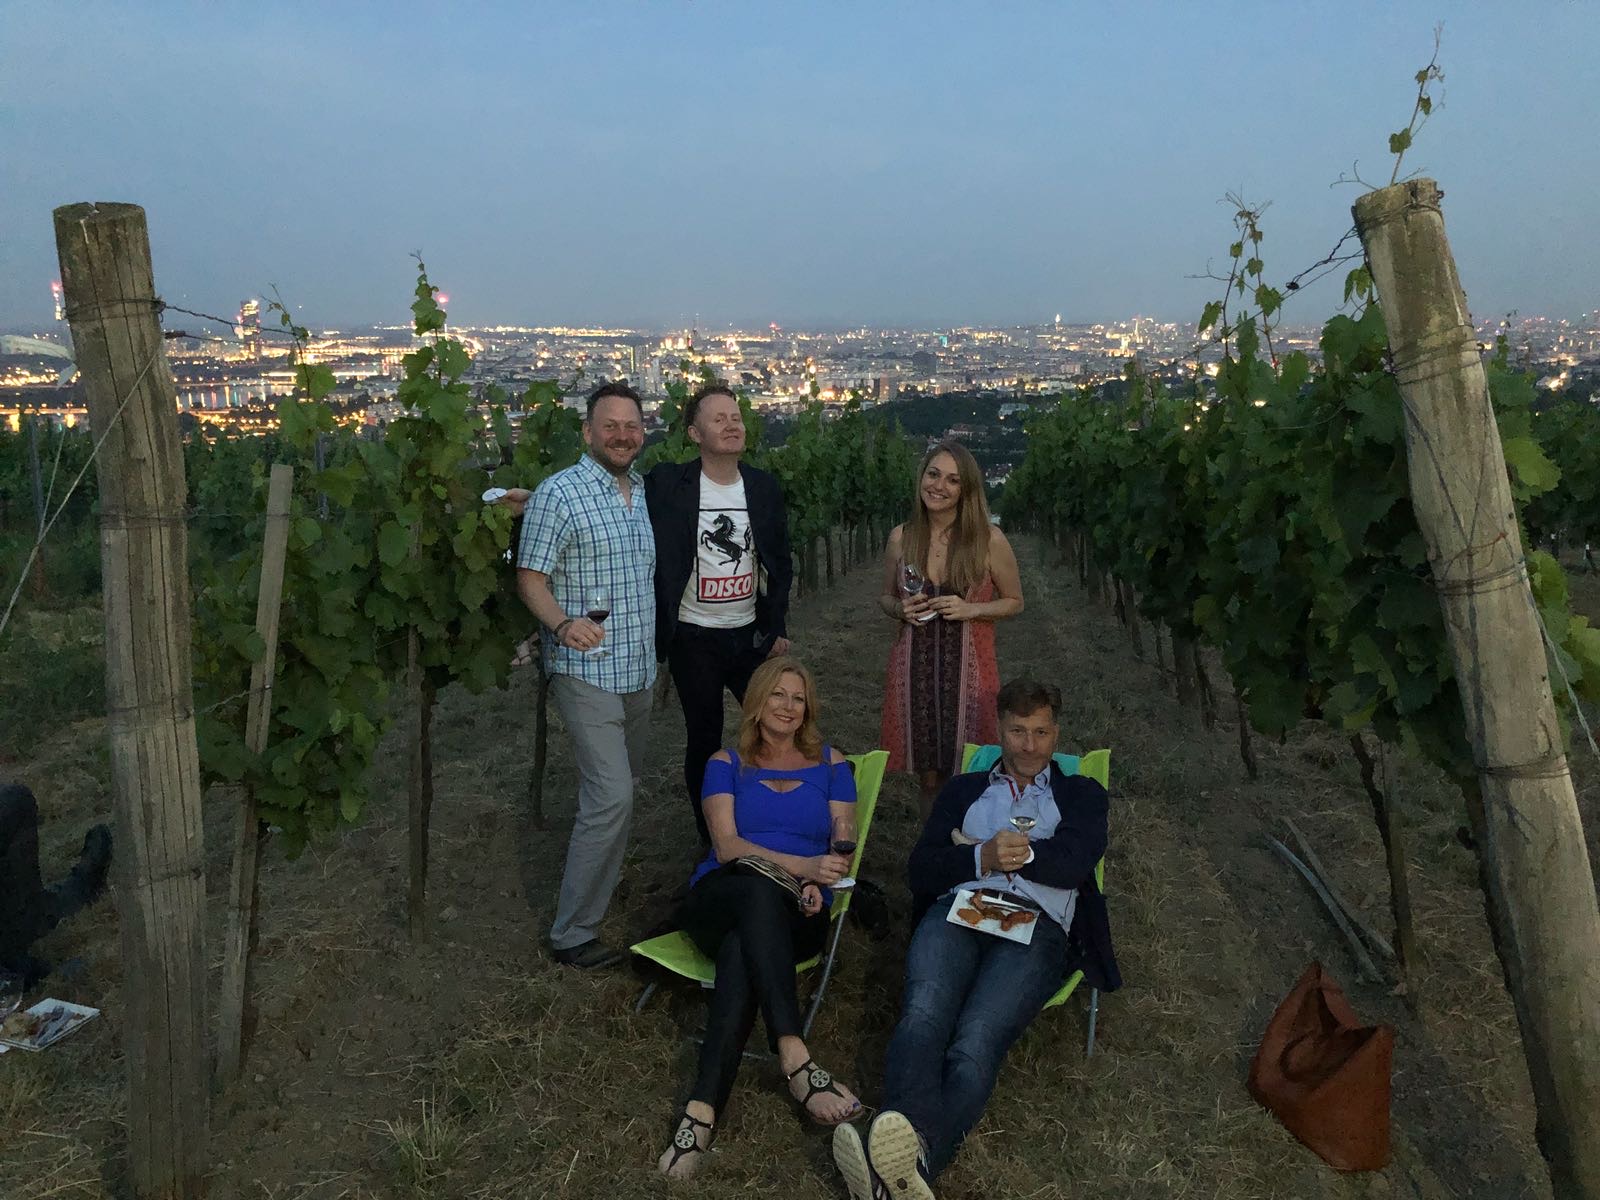 Most of our little crew up on the hillsides overlooking Vienna as part of the Nussberg vineyard party.